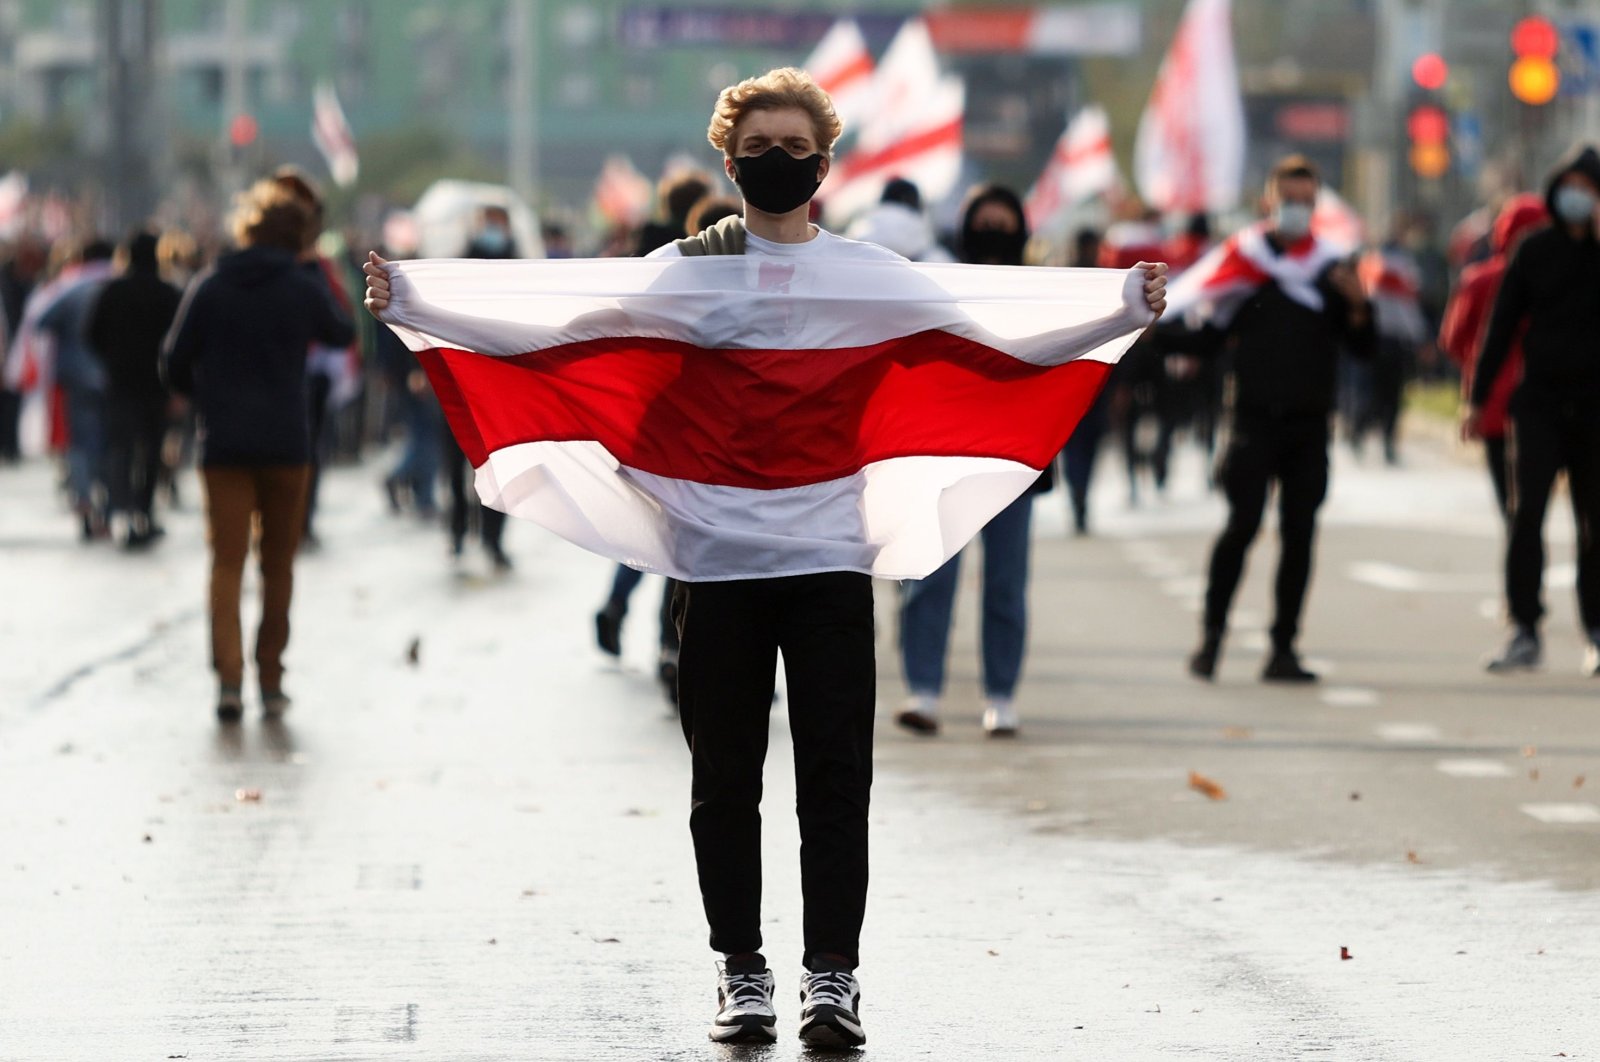 A man carries a former white-red-white flag of Belarus during a rally demanding to free jailed activists of the opposition in Minsk, Belarus, Oct. 4, 2020. (AFP Photo)